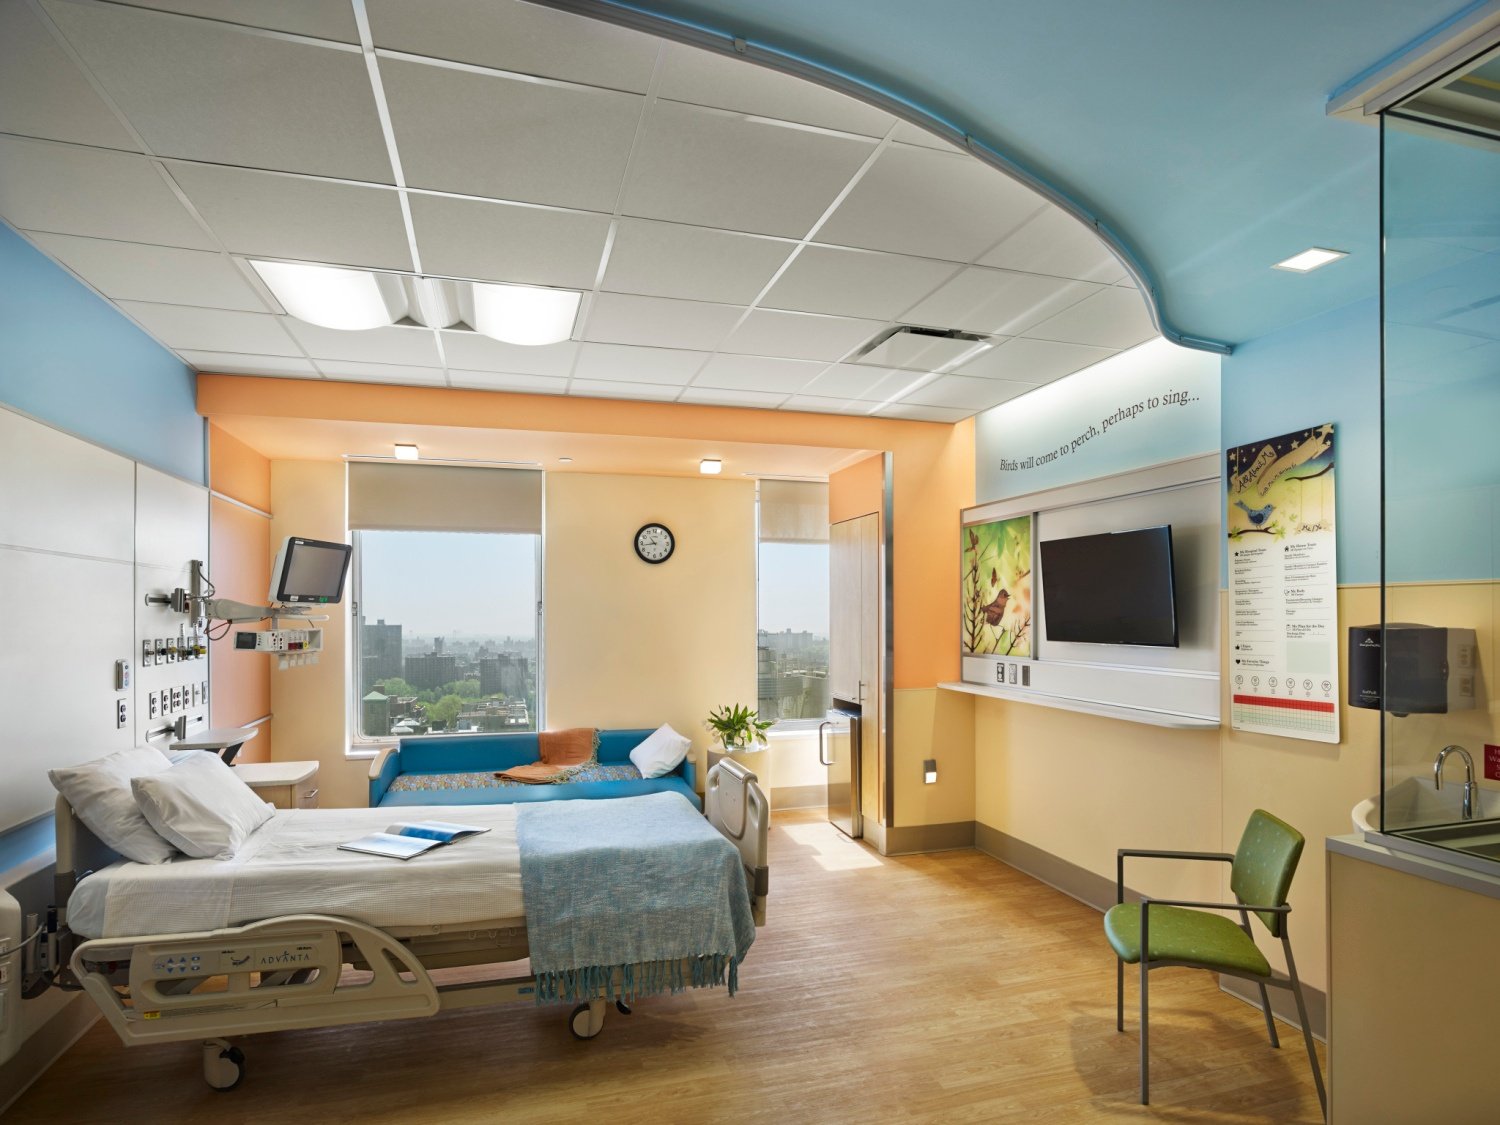 CHoNY PICU patient room